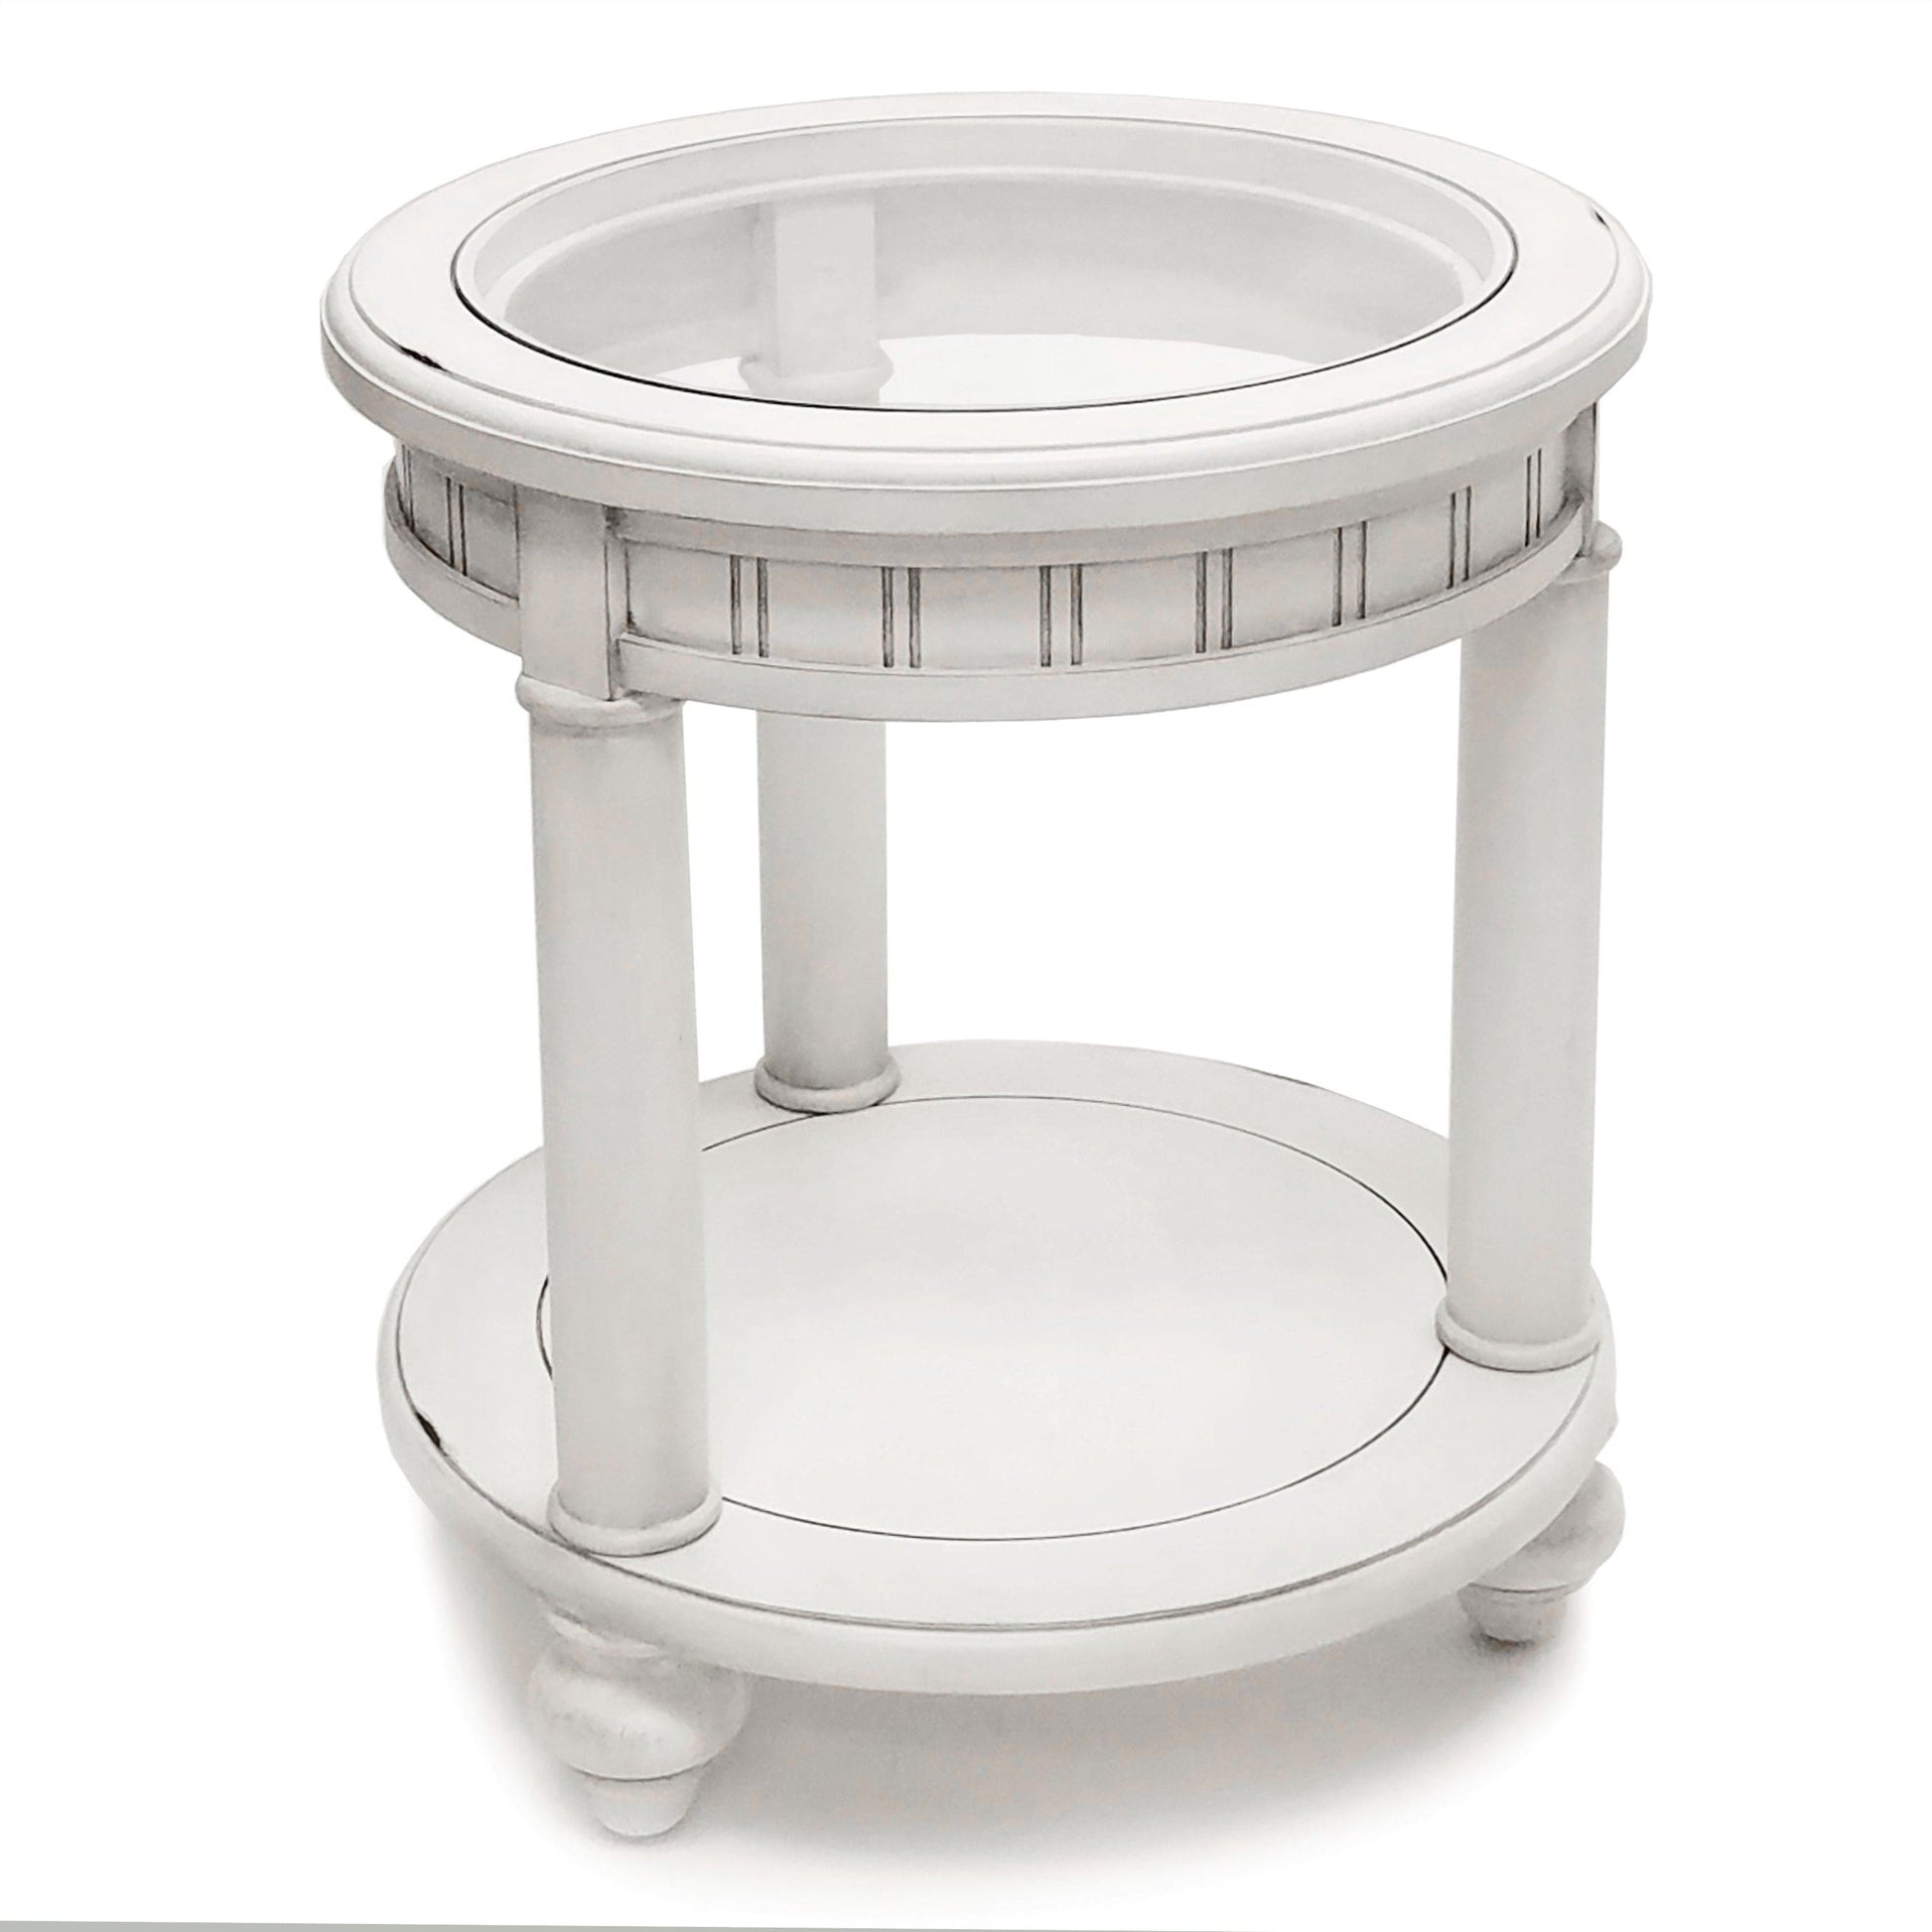 Sea Winds Trading Monaco Round End Table B81802 Indoor Occasional Sea Winds Trading Co 